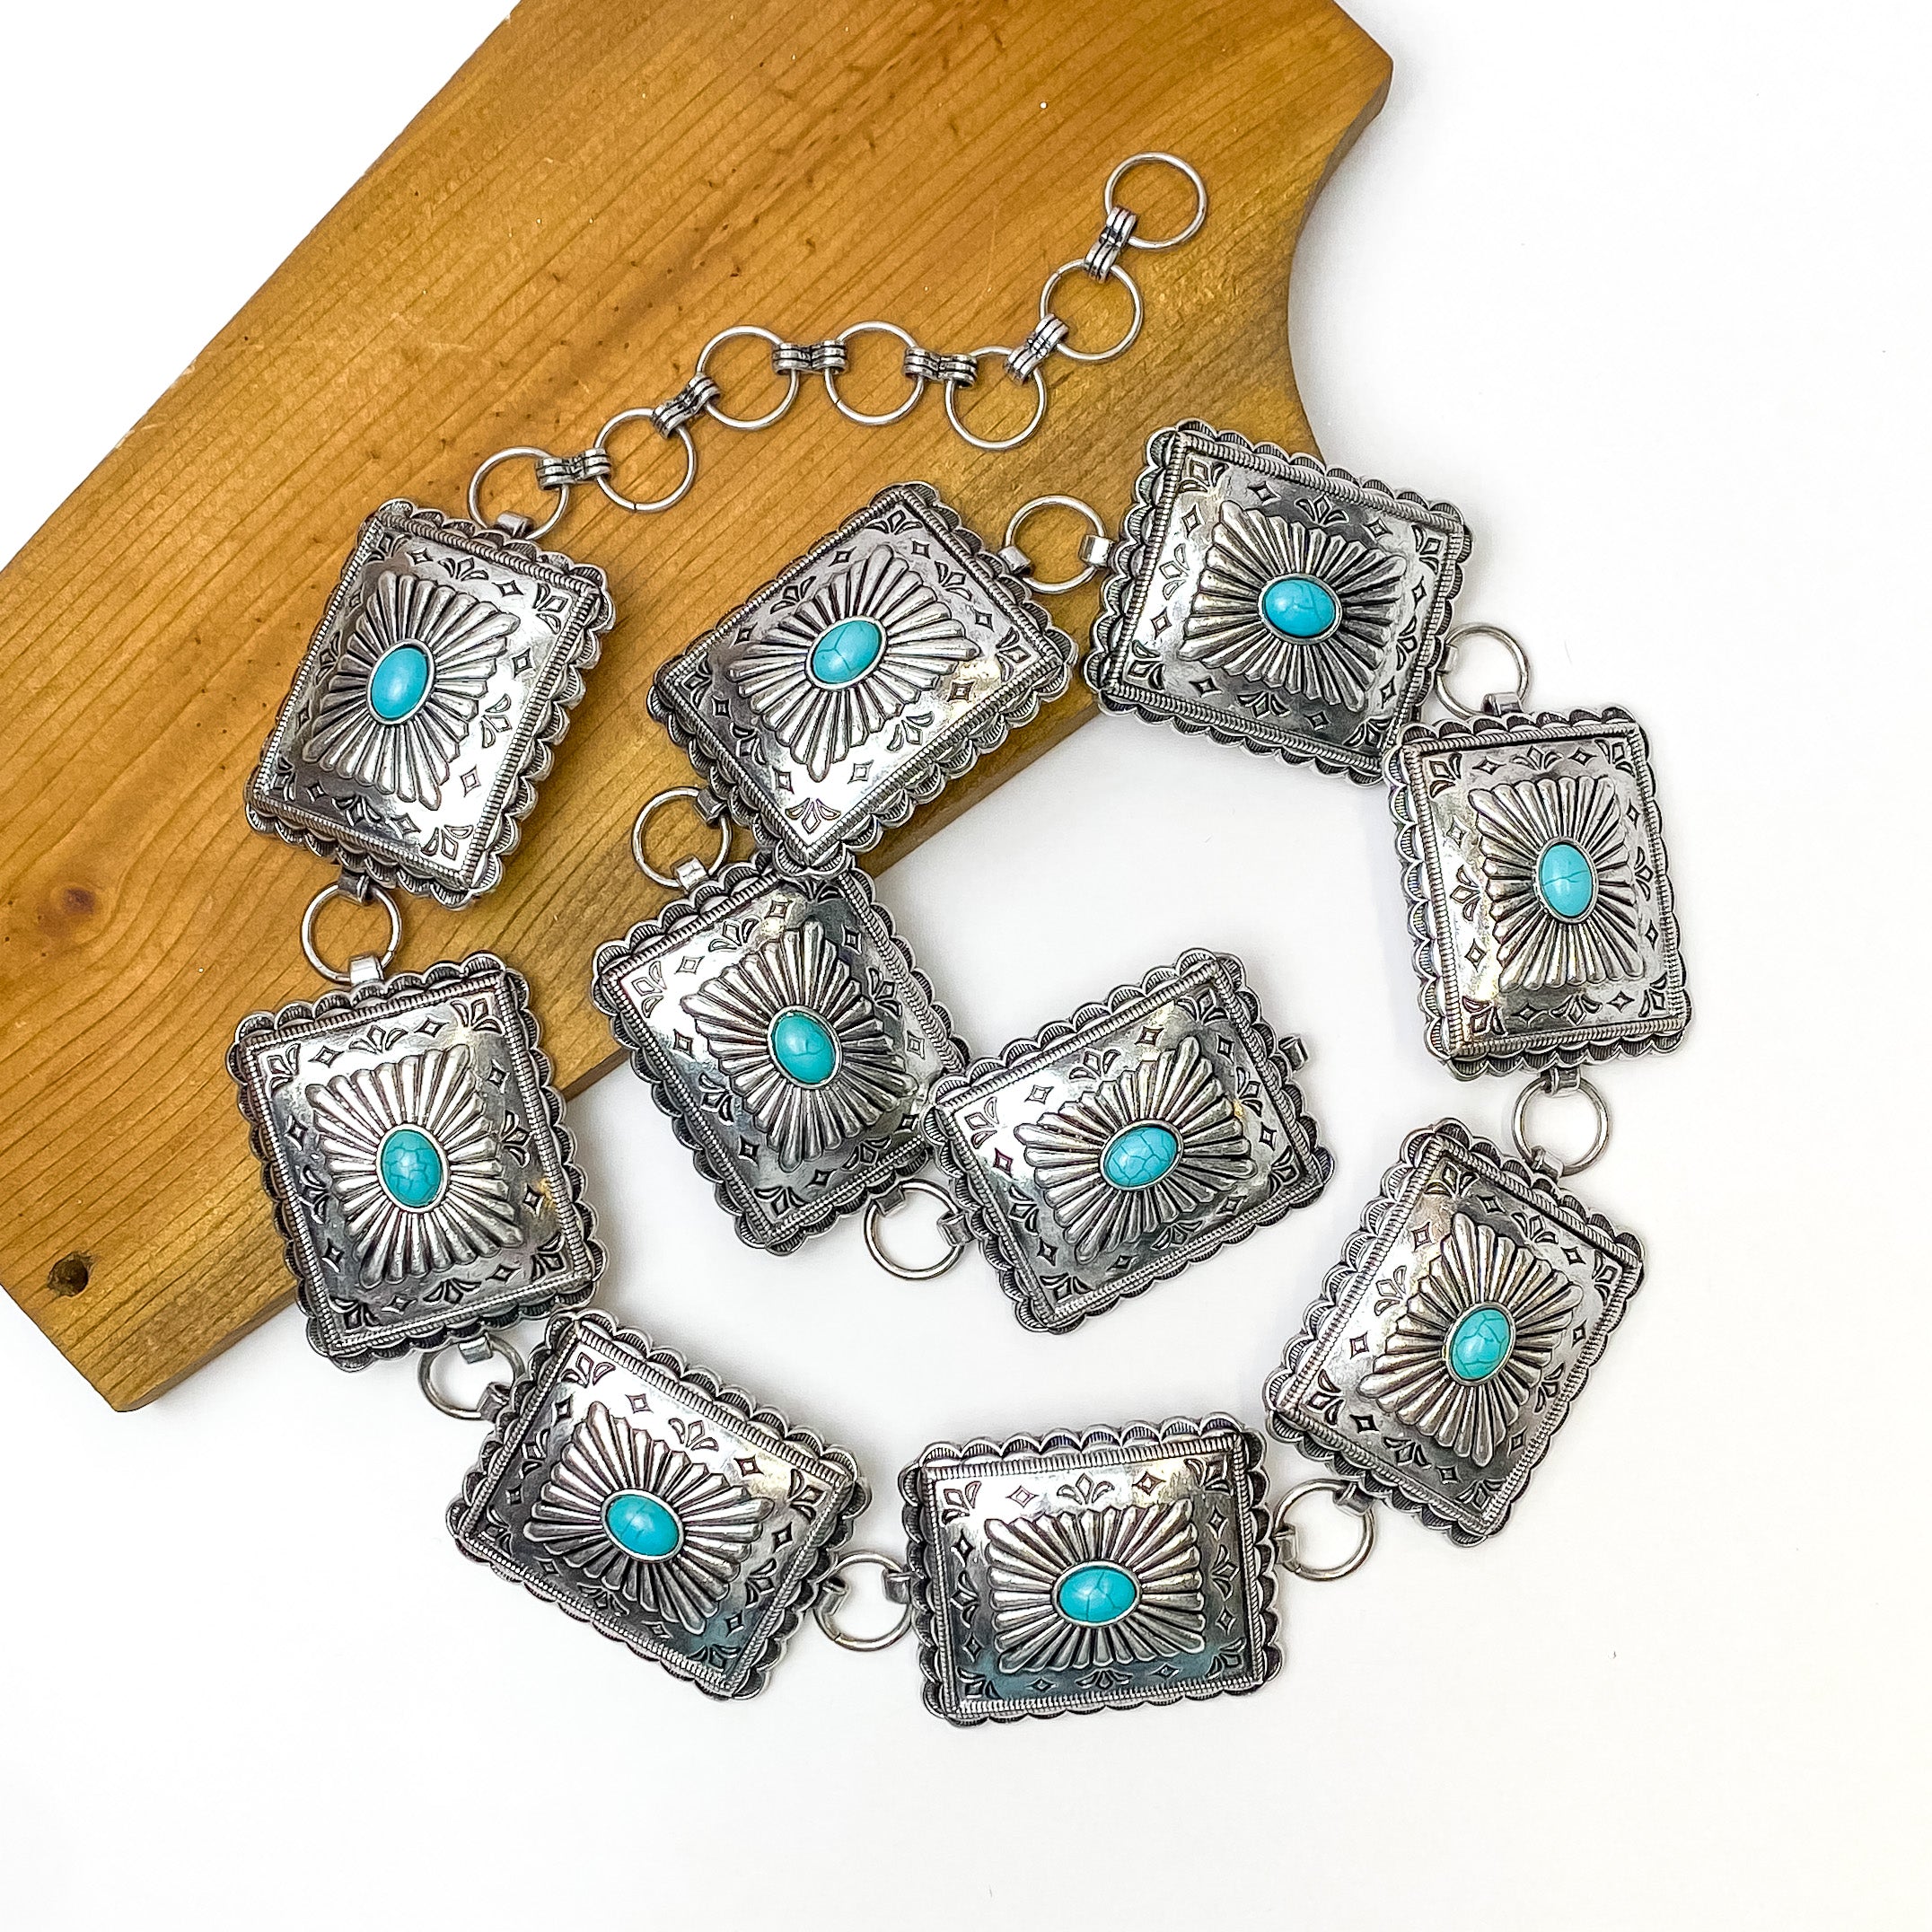 Pictured is a silver, square concho belt with detailing and turquoise center stones. This belt is pictured in a spiral on a white and brown background. 